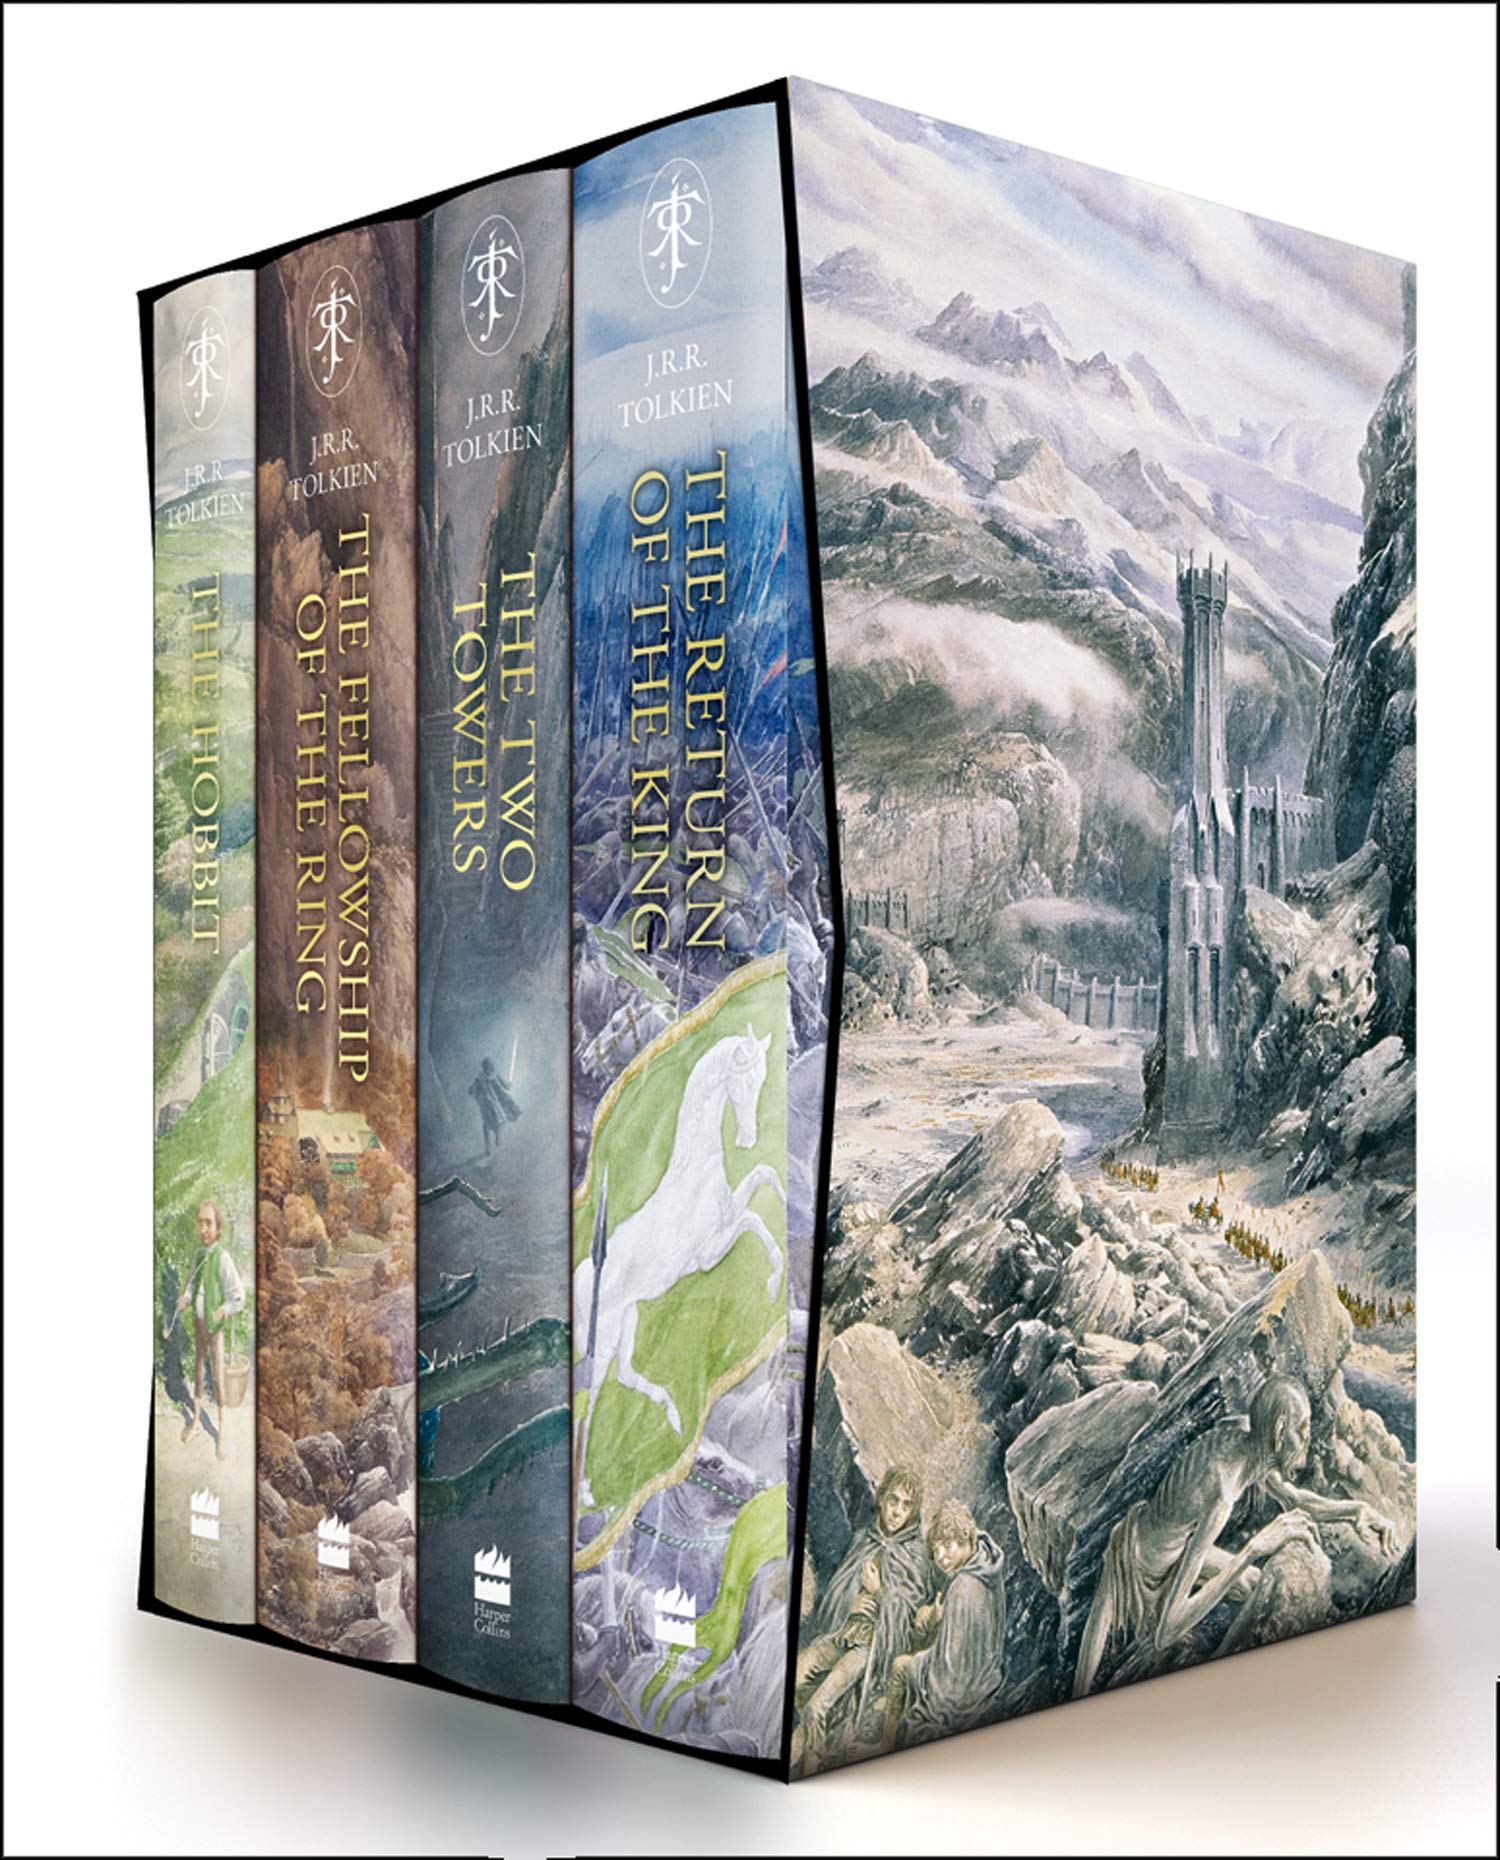 Book The Hobbit & The Lord of the Rings Boxed Set by J. R. R. Tolkien | Hardcover – Illustrated